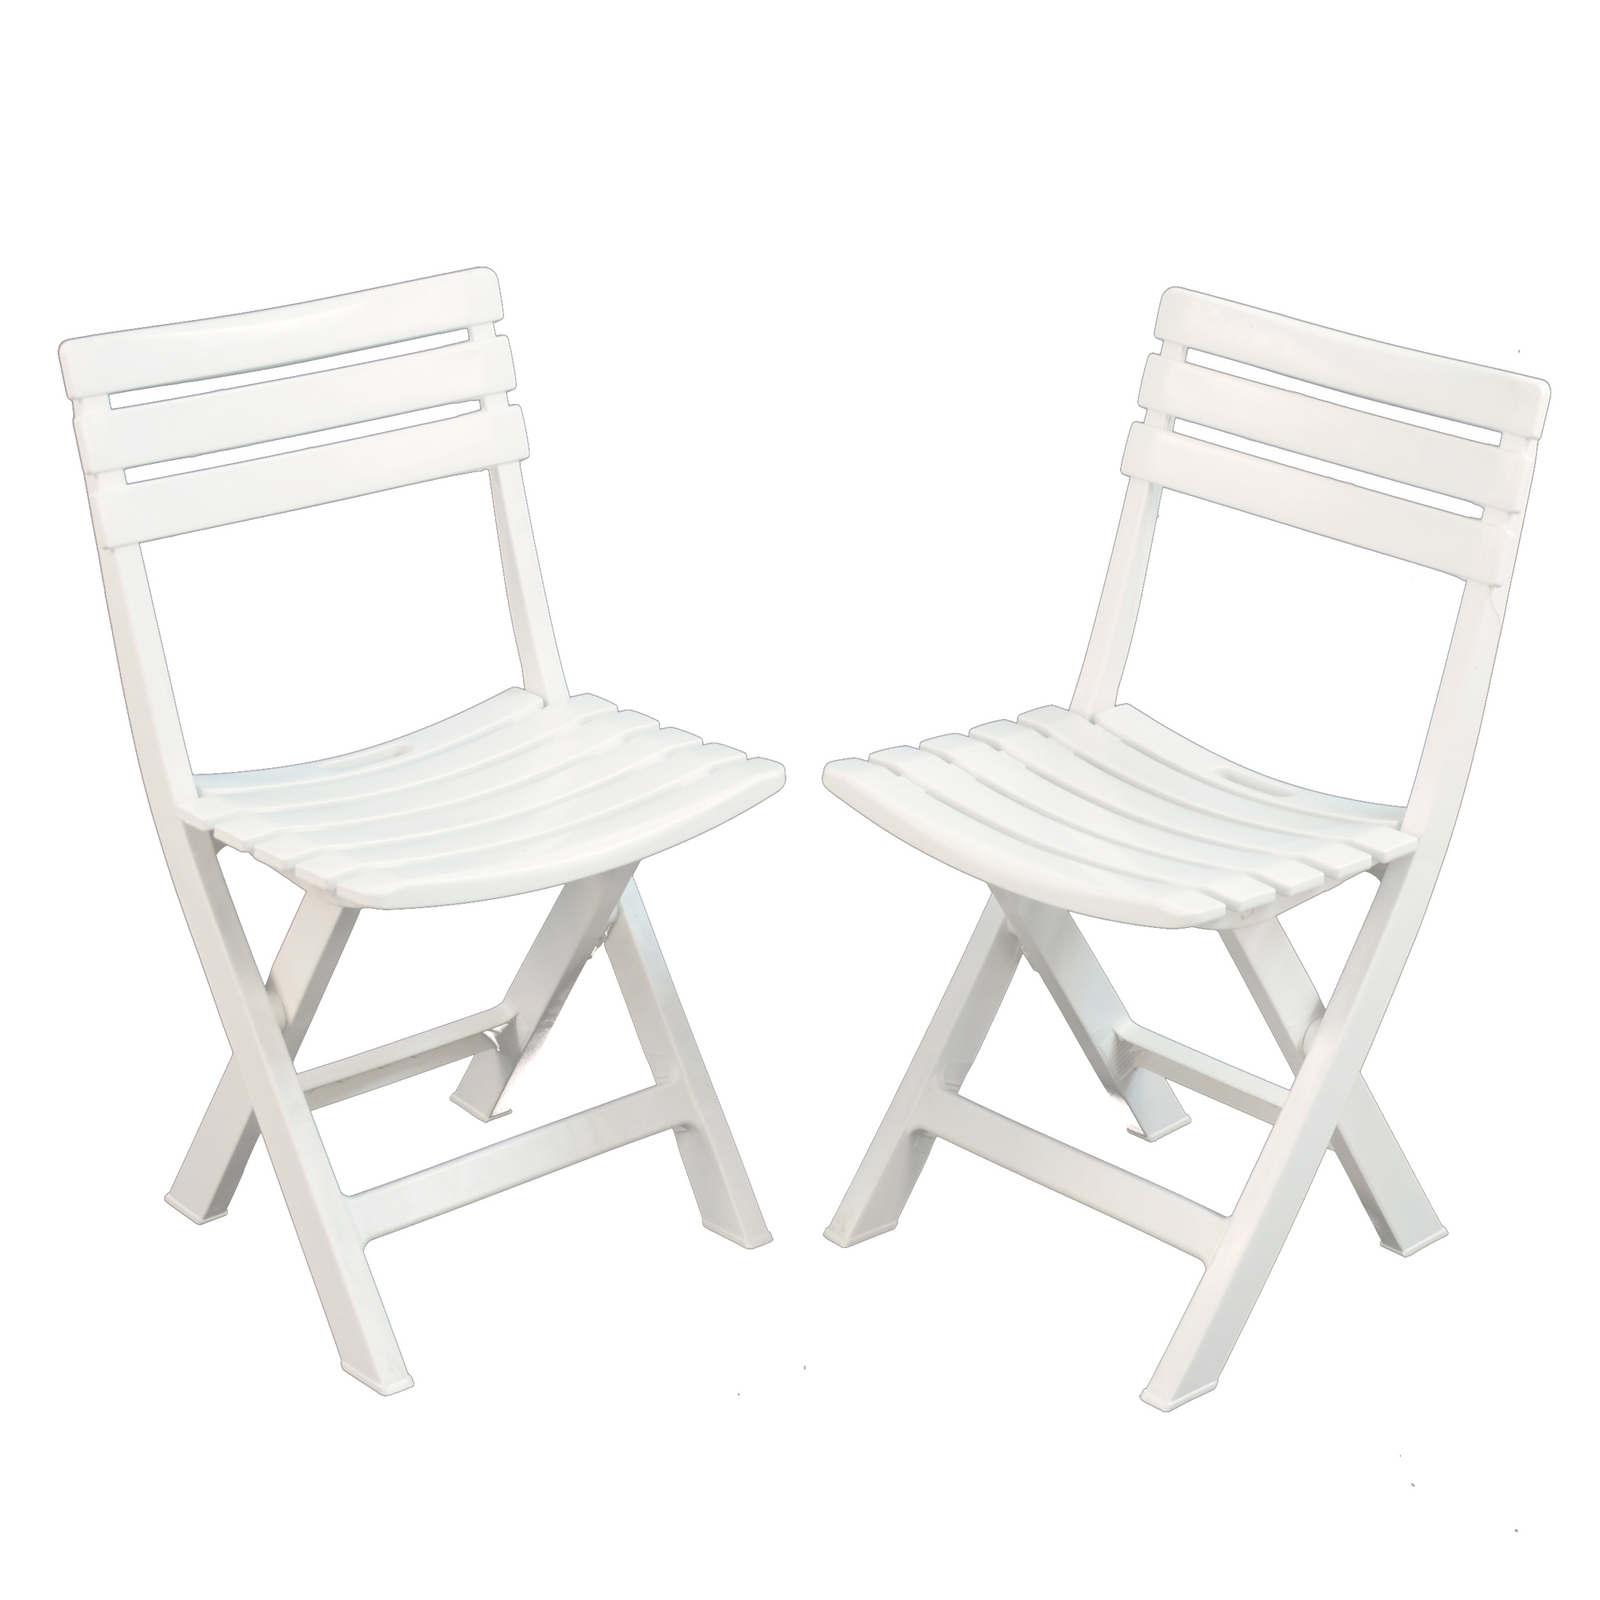 Trabella Brescia Folding Chair White (Pack of 2) Chairs Trabella   